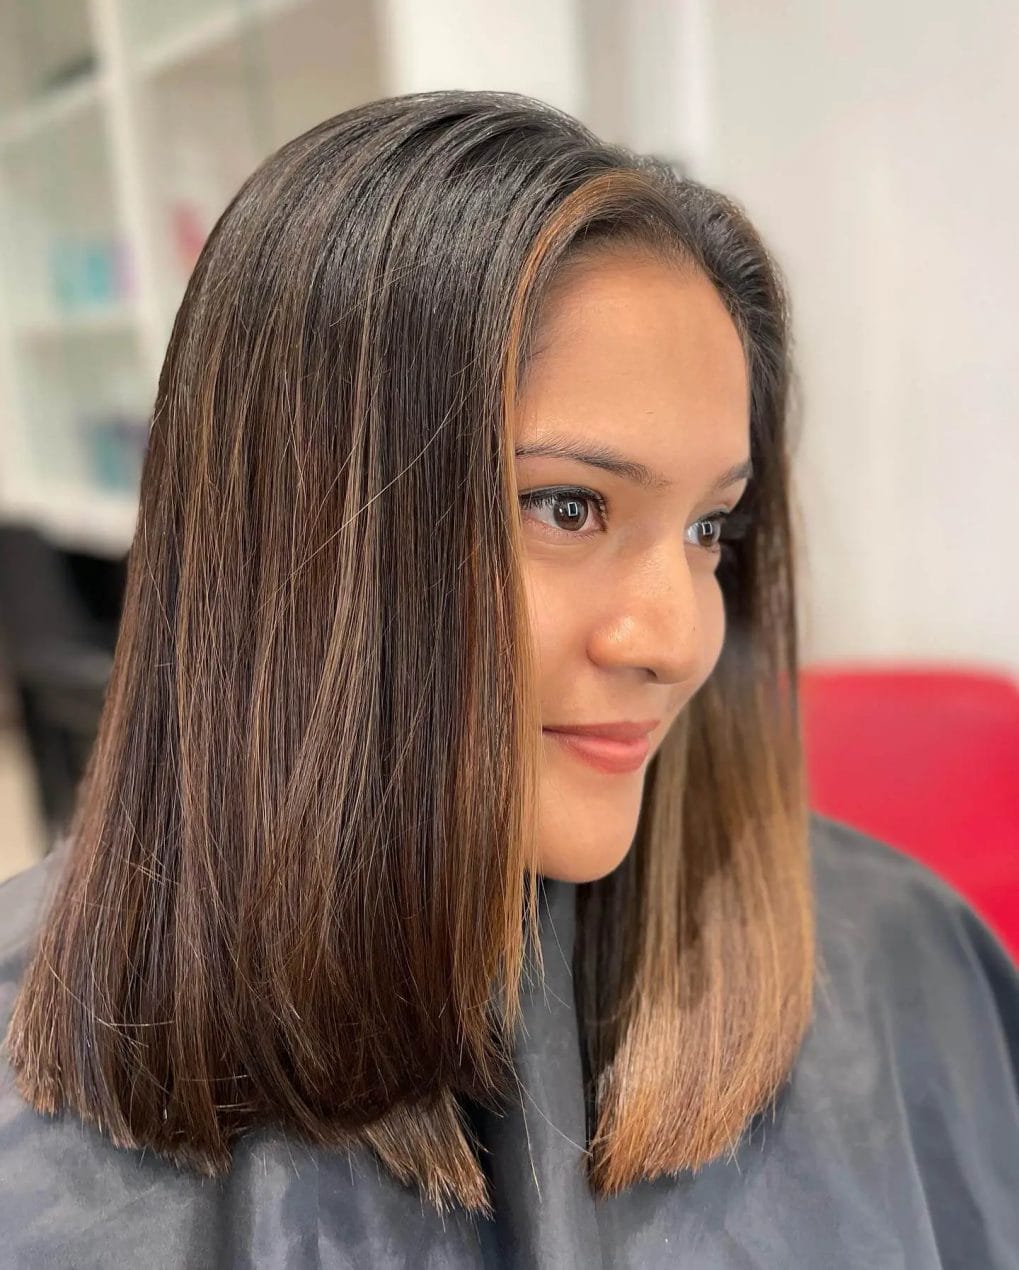 Straight shoulder-length hair with caramel gradient highlights.